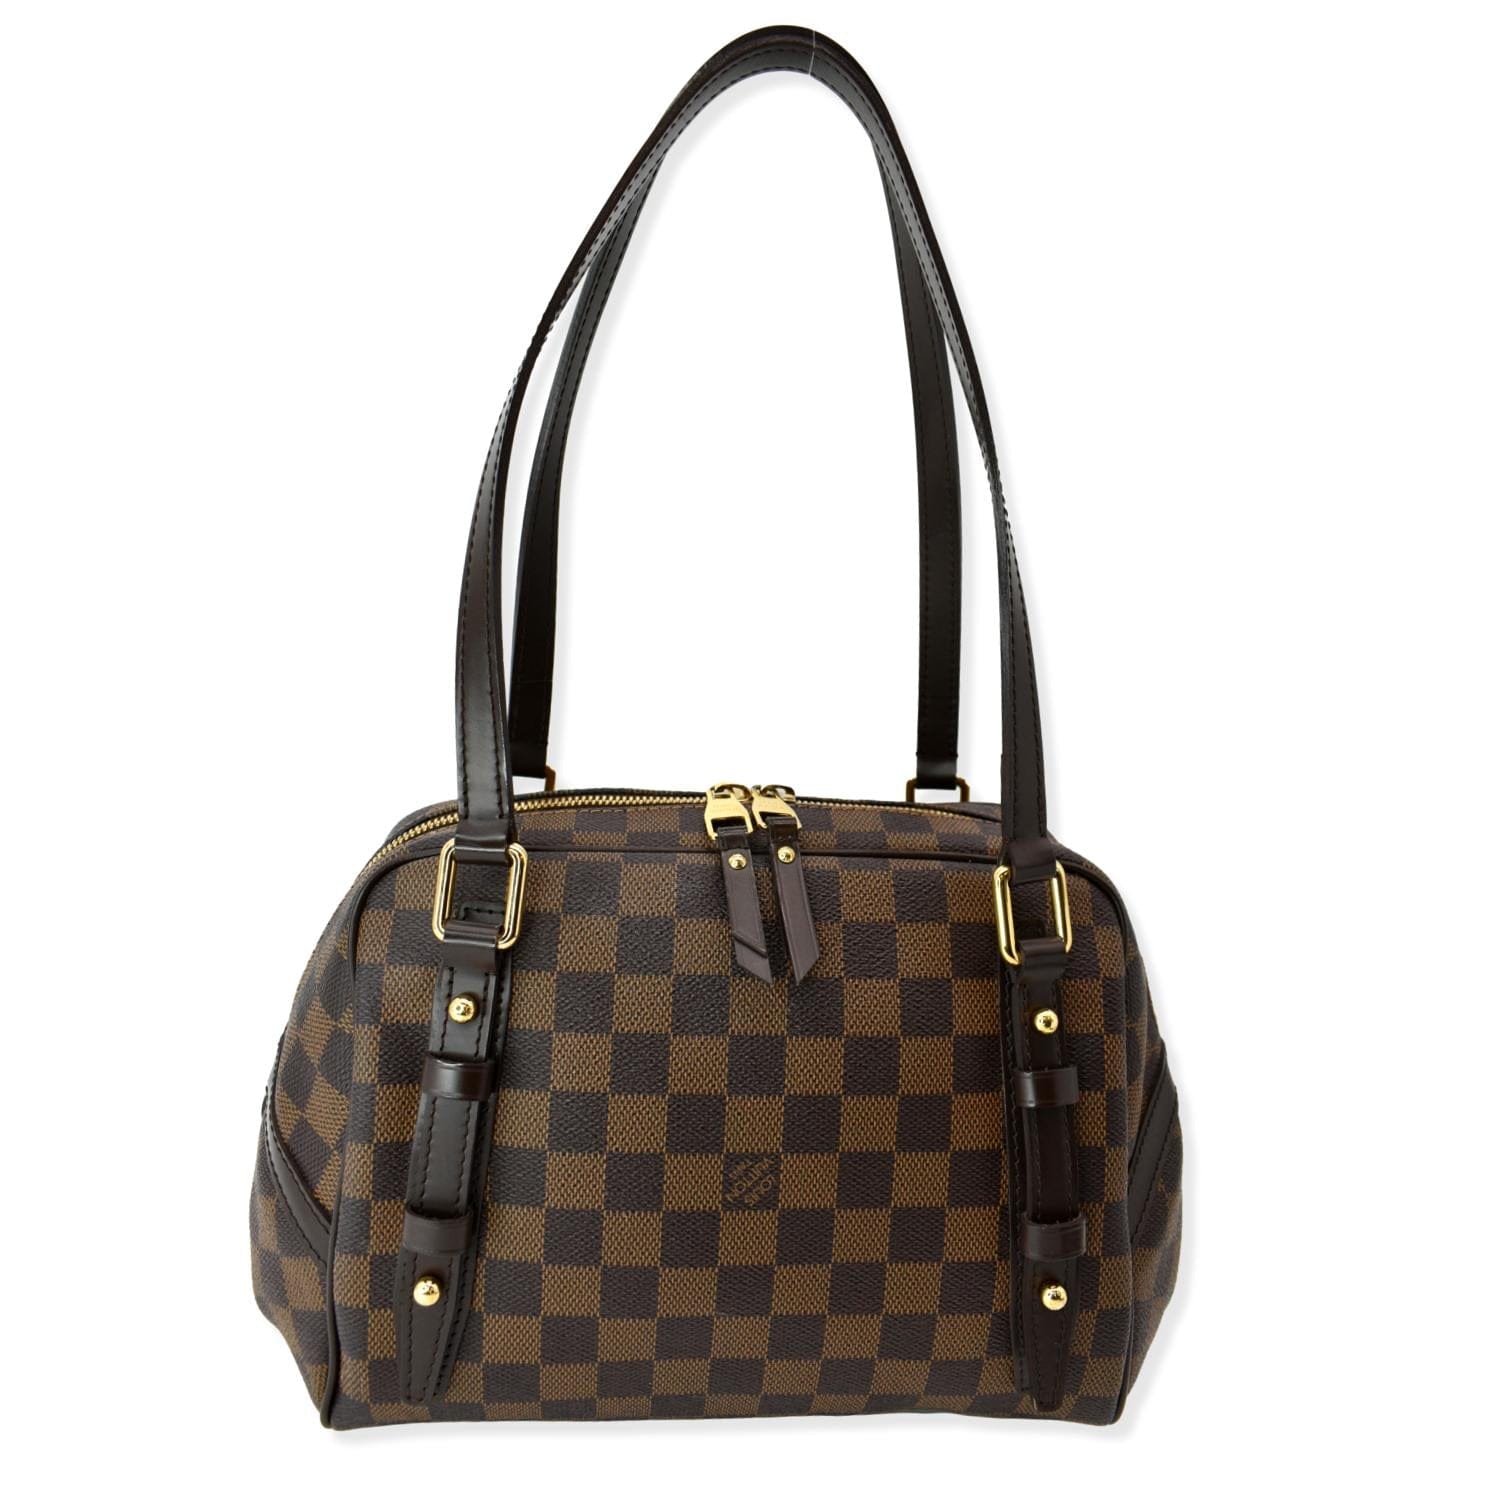 TRR Top 5 Louis Vuitton Bags With The Best Resale Value